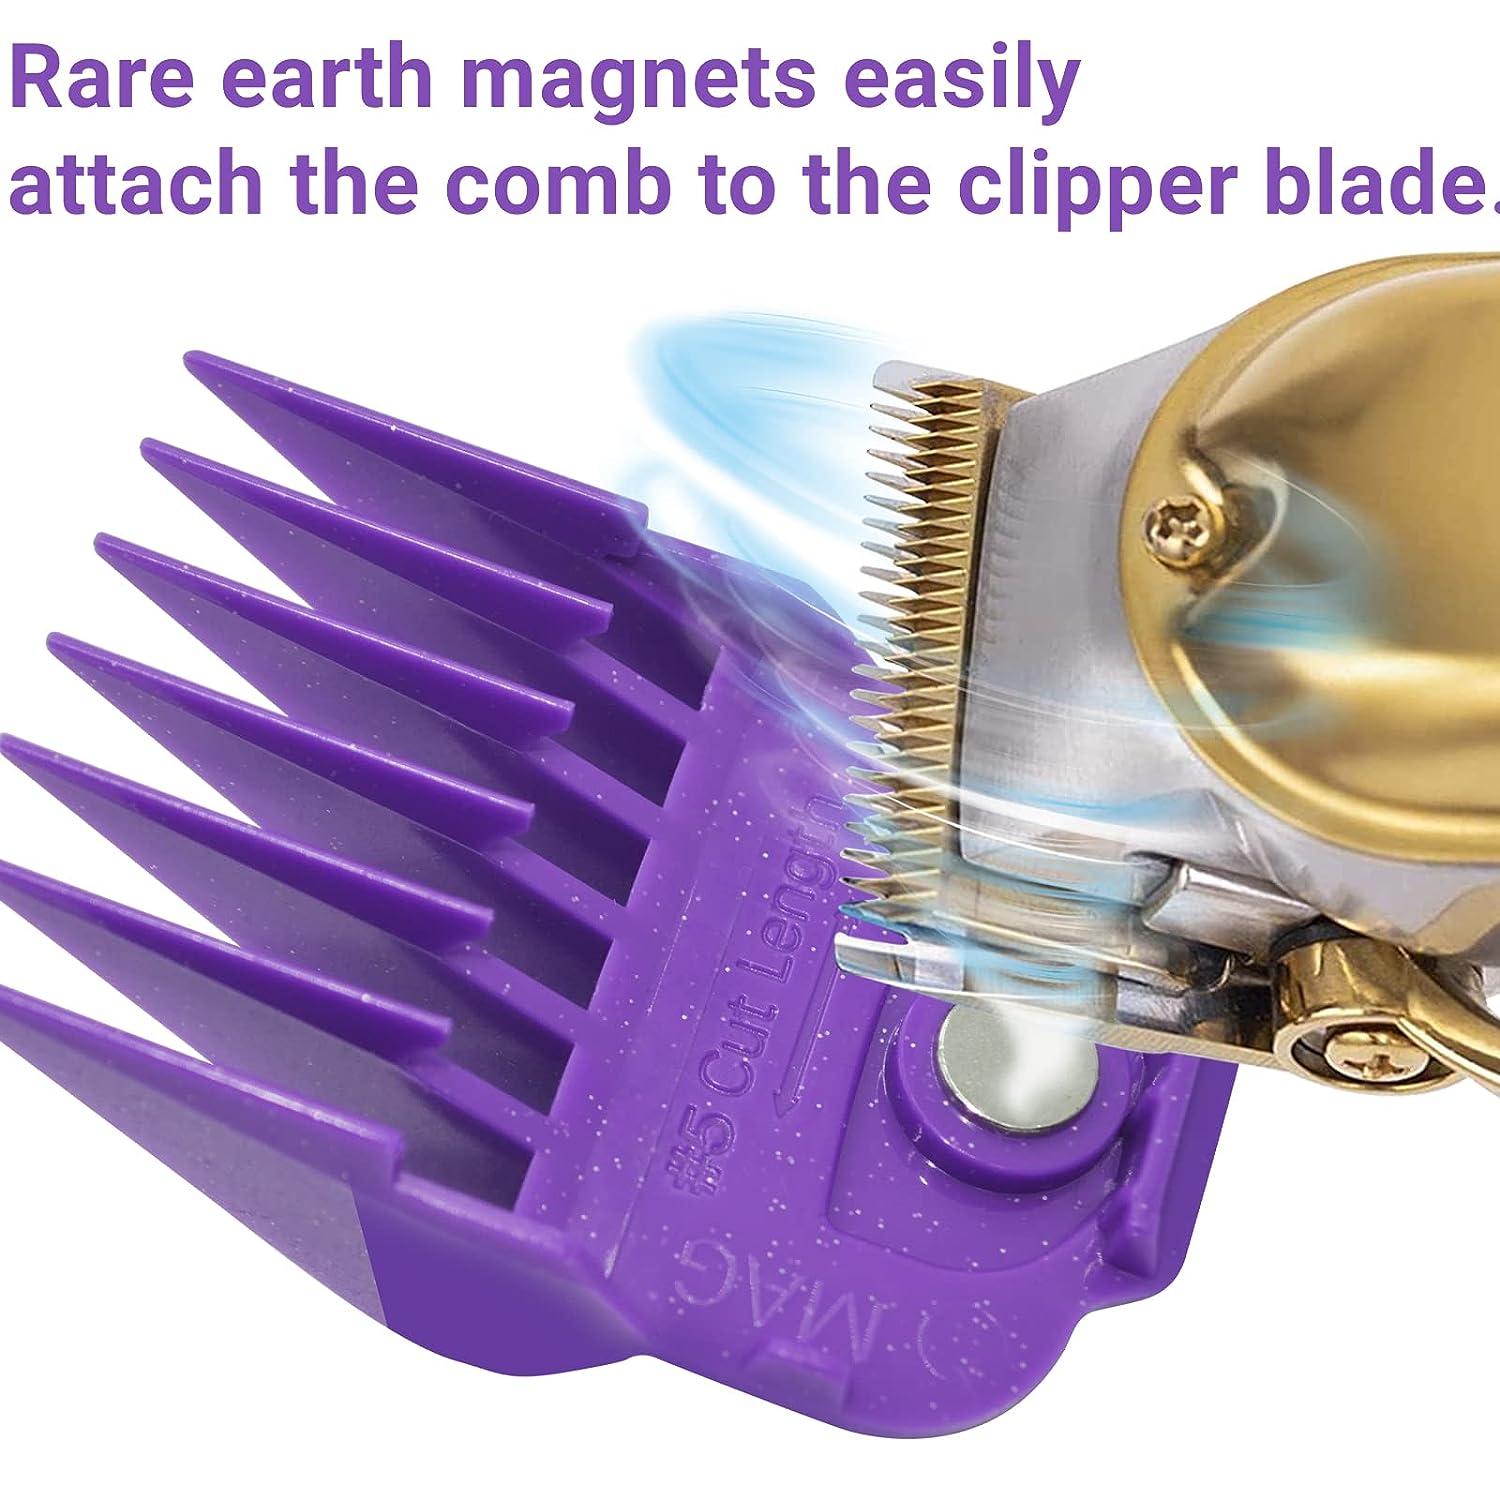 Magnets to hold clipper blades when sharpening